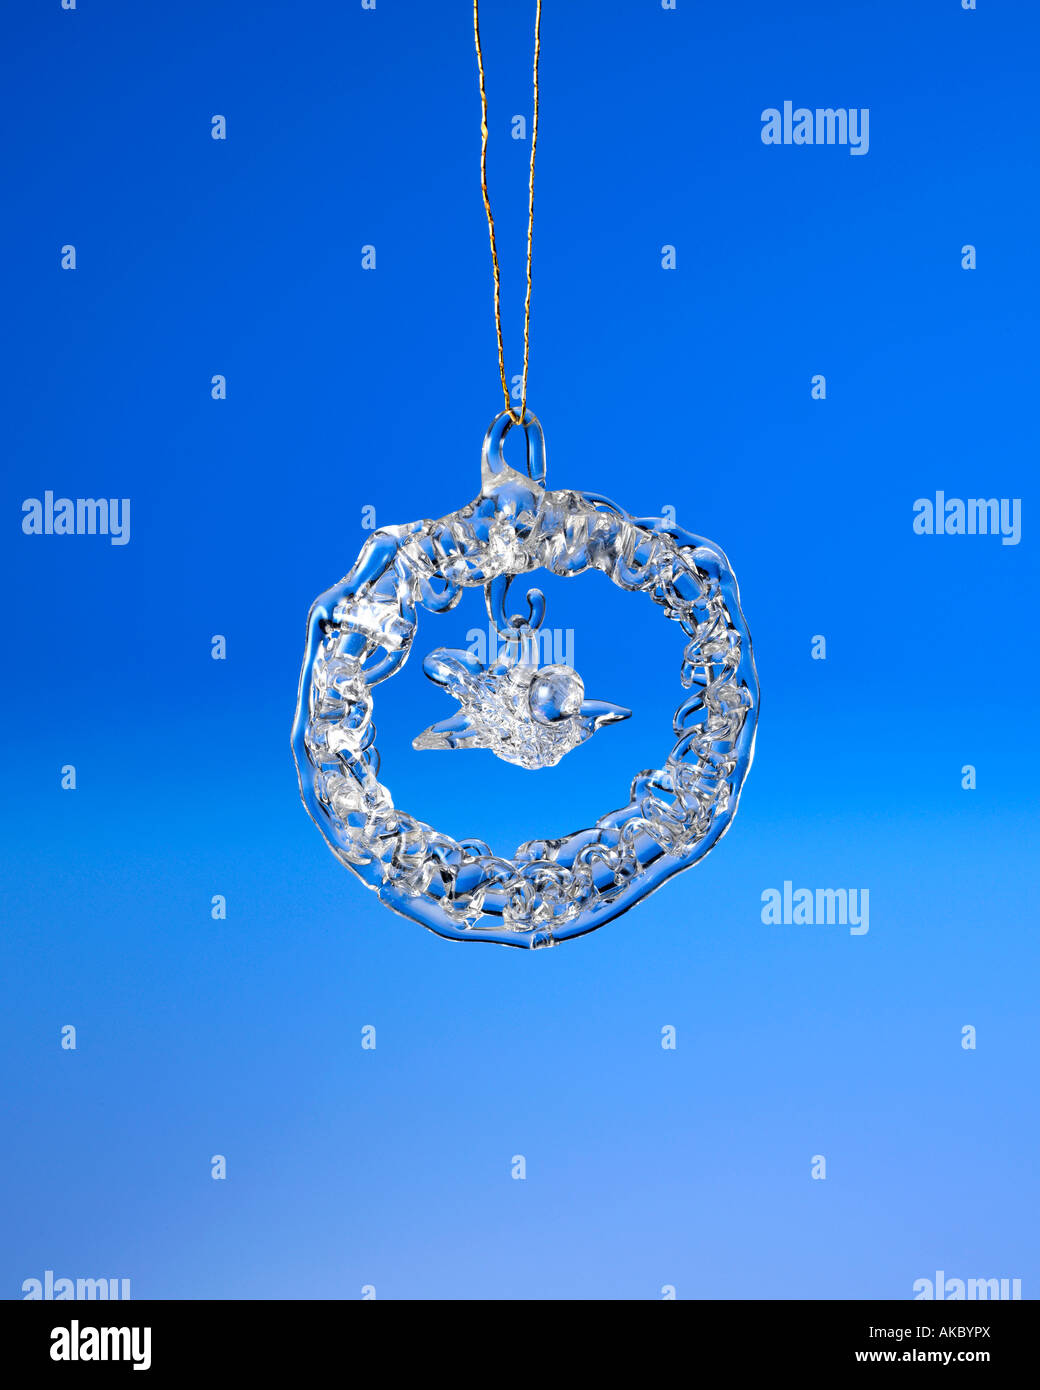 crystal wreath Christmas ornament hanging on hook Stock Photo